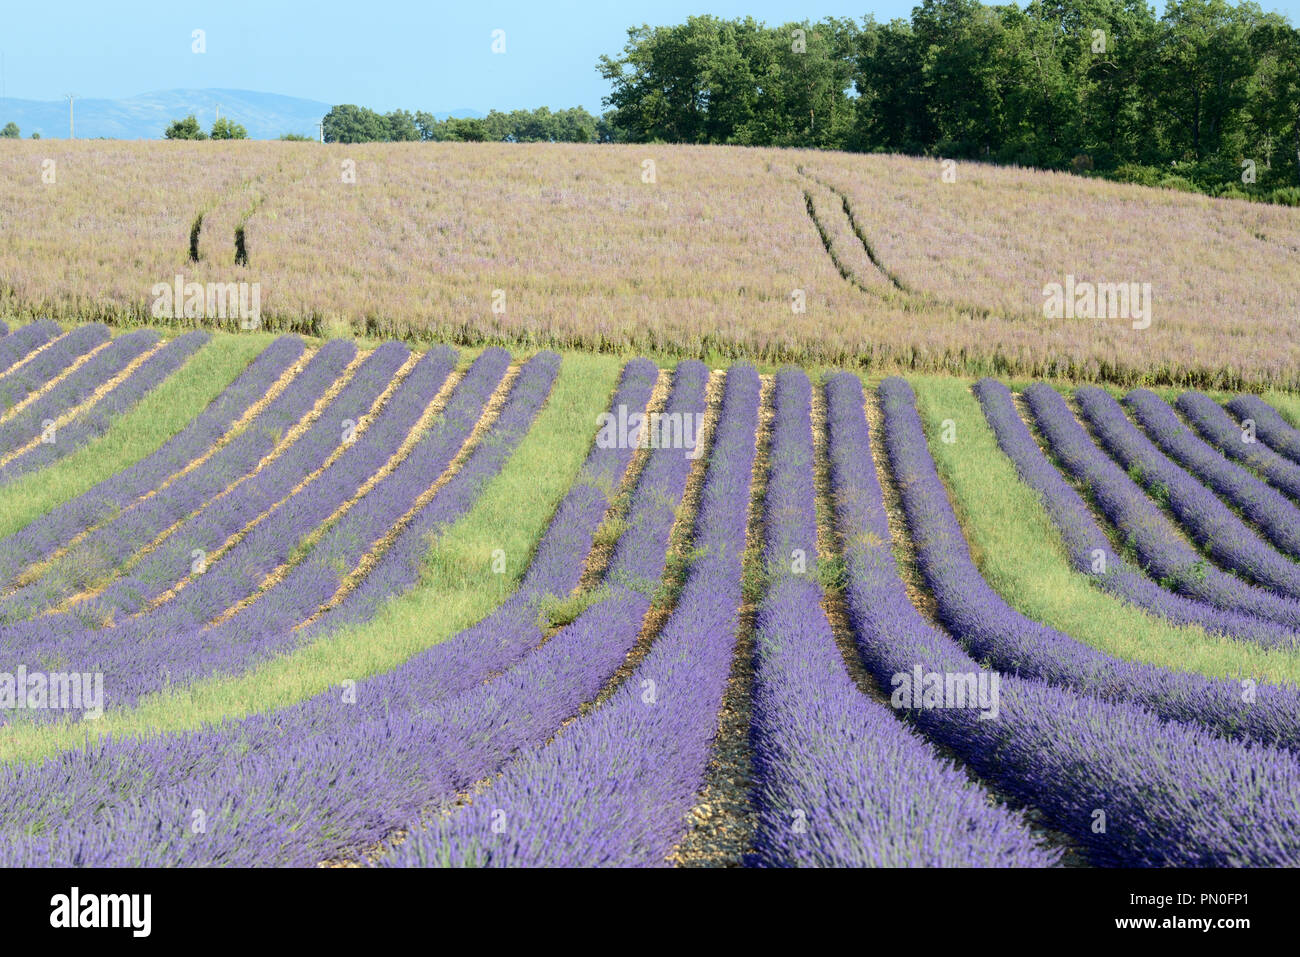 Rows of Lavender Plants & Field of Clary or Clary Sage, Salvia sclarea, on the Valensole Plateau Provence France Stock Photo